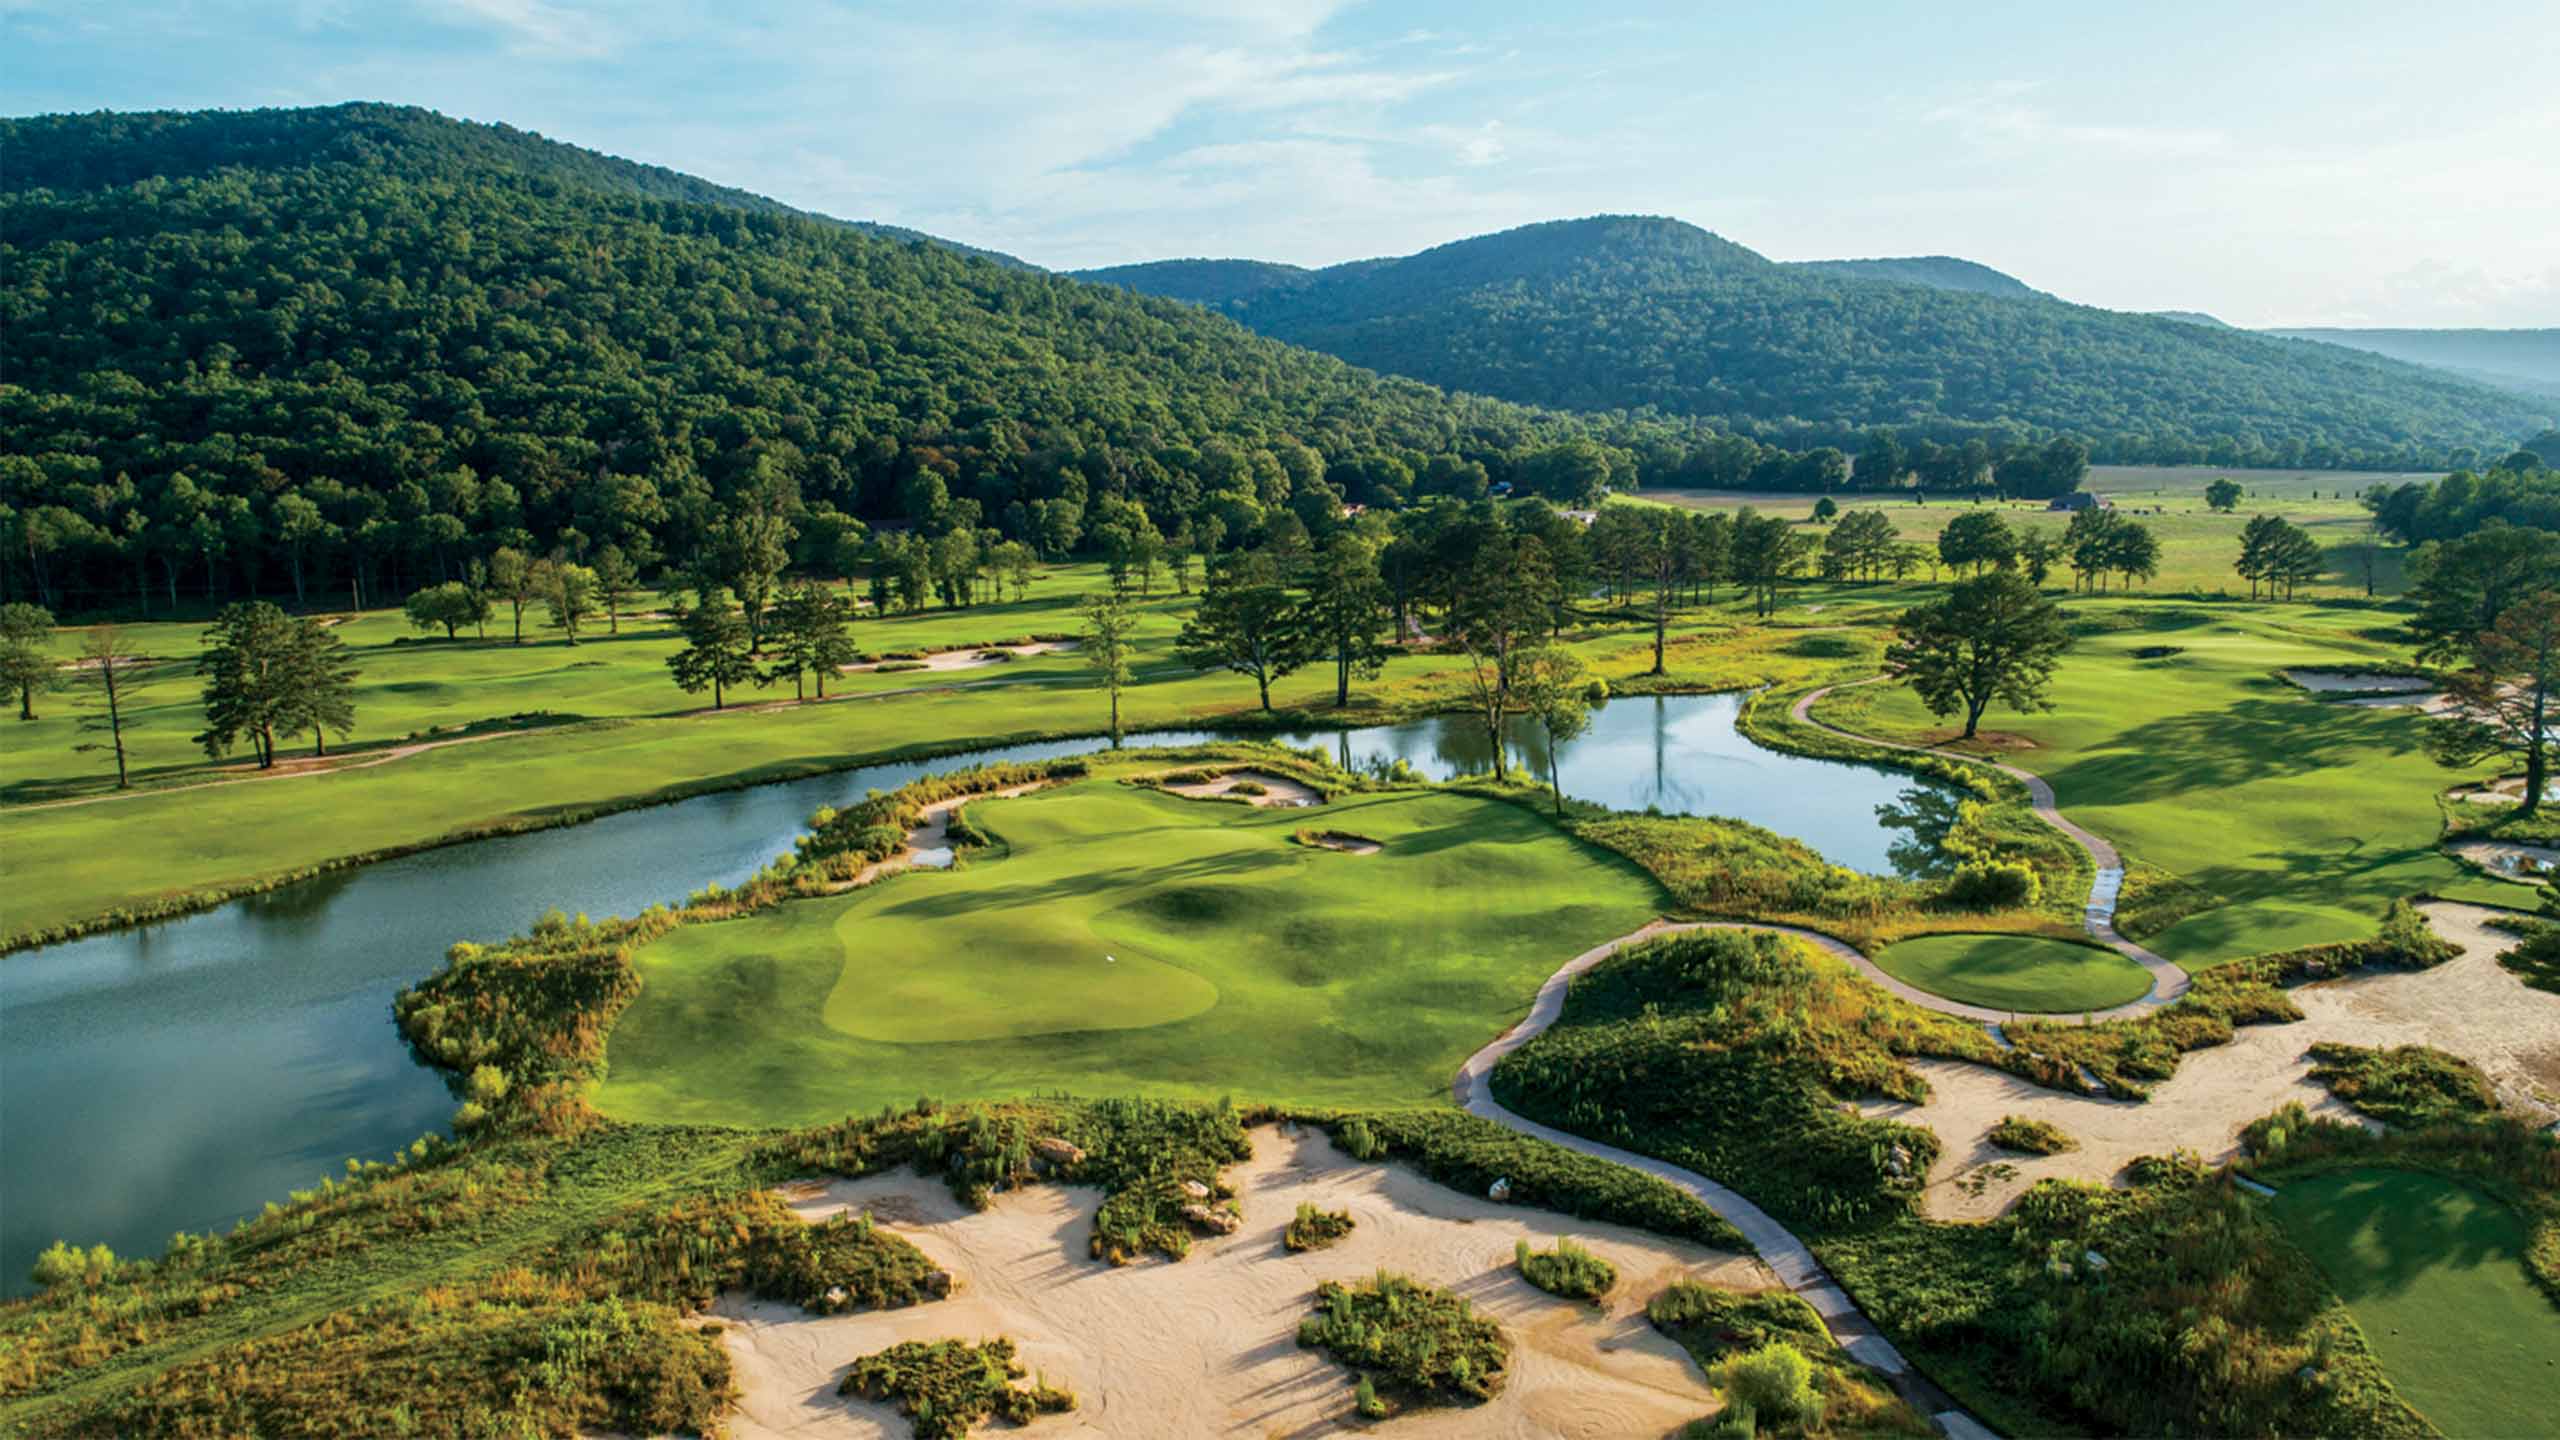 The 50 best 9-hole courses in the world, ranked!